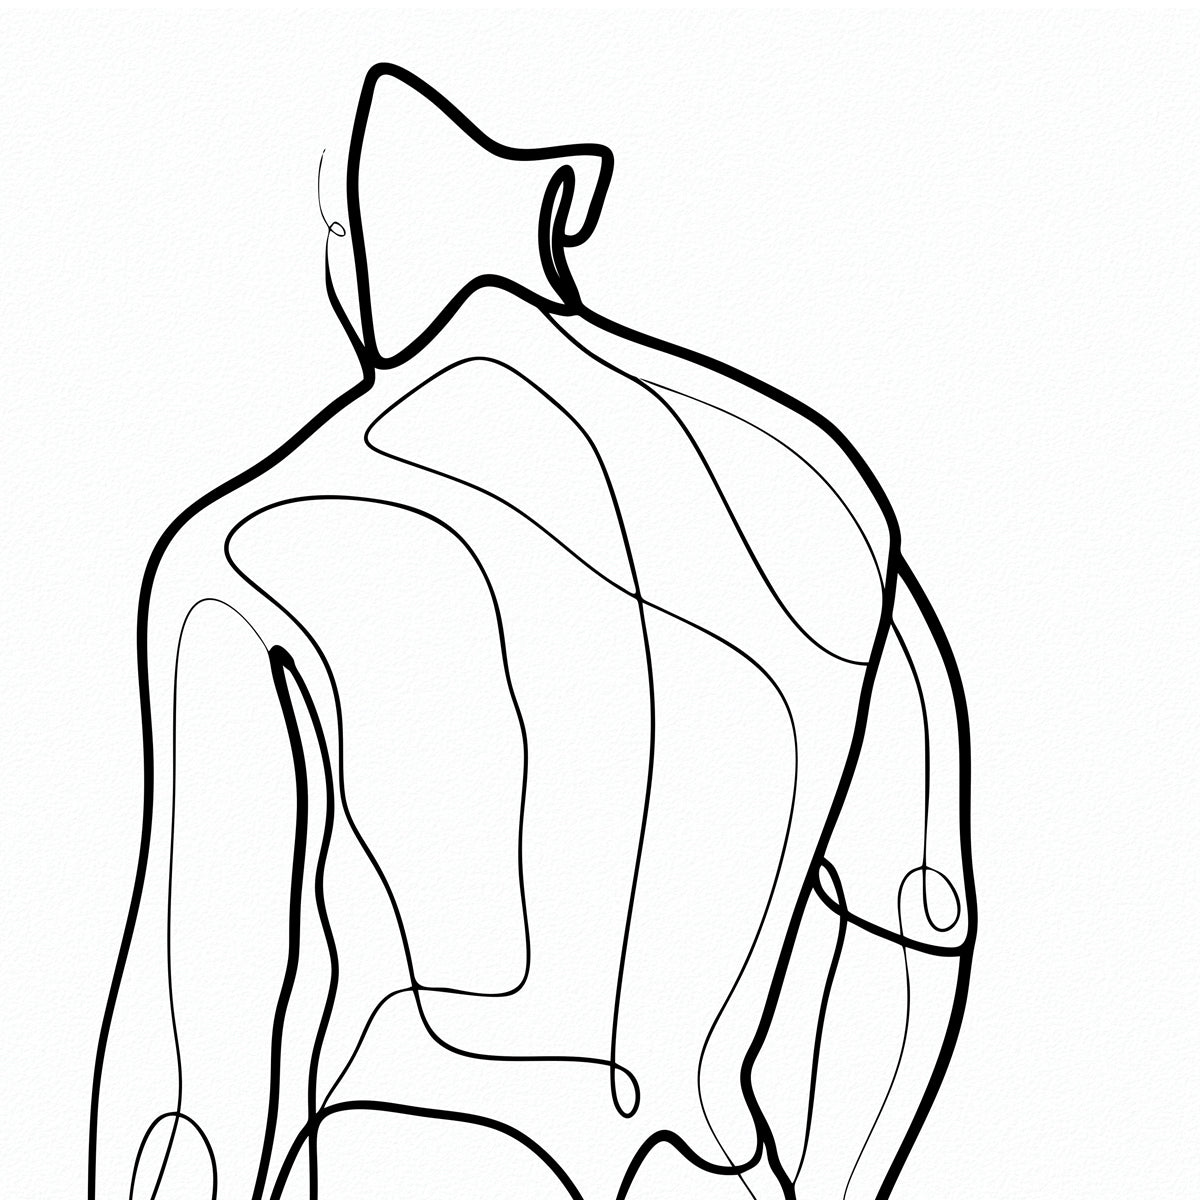 Contour of Contemplation - Solo Male Figure from Behind - Giclee Art Print